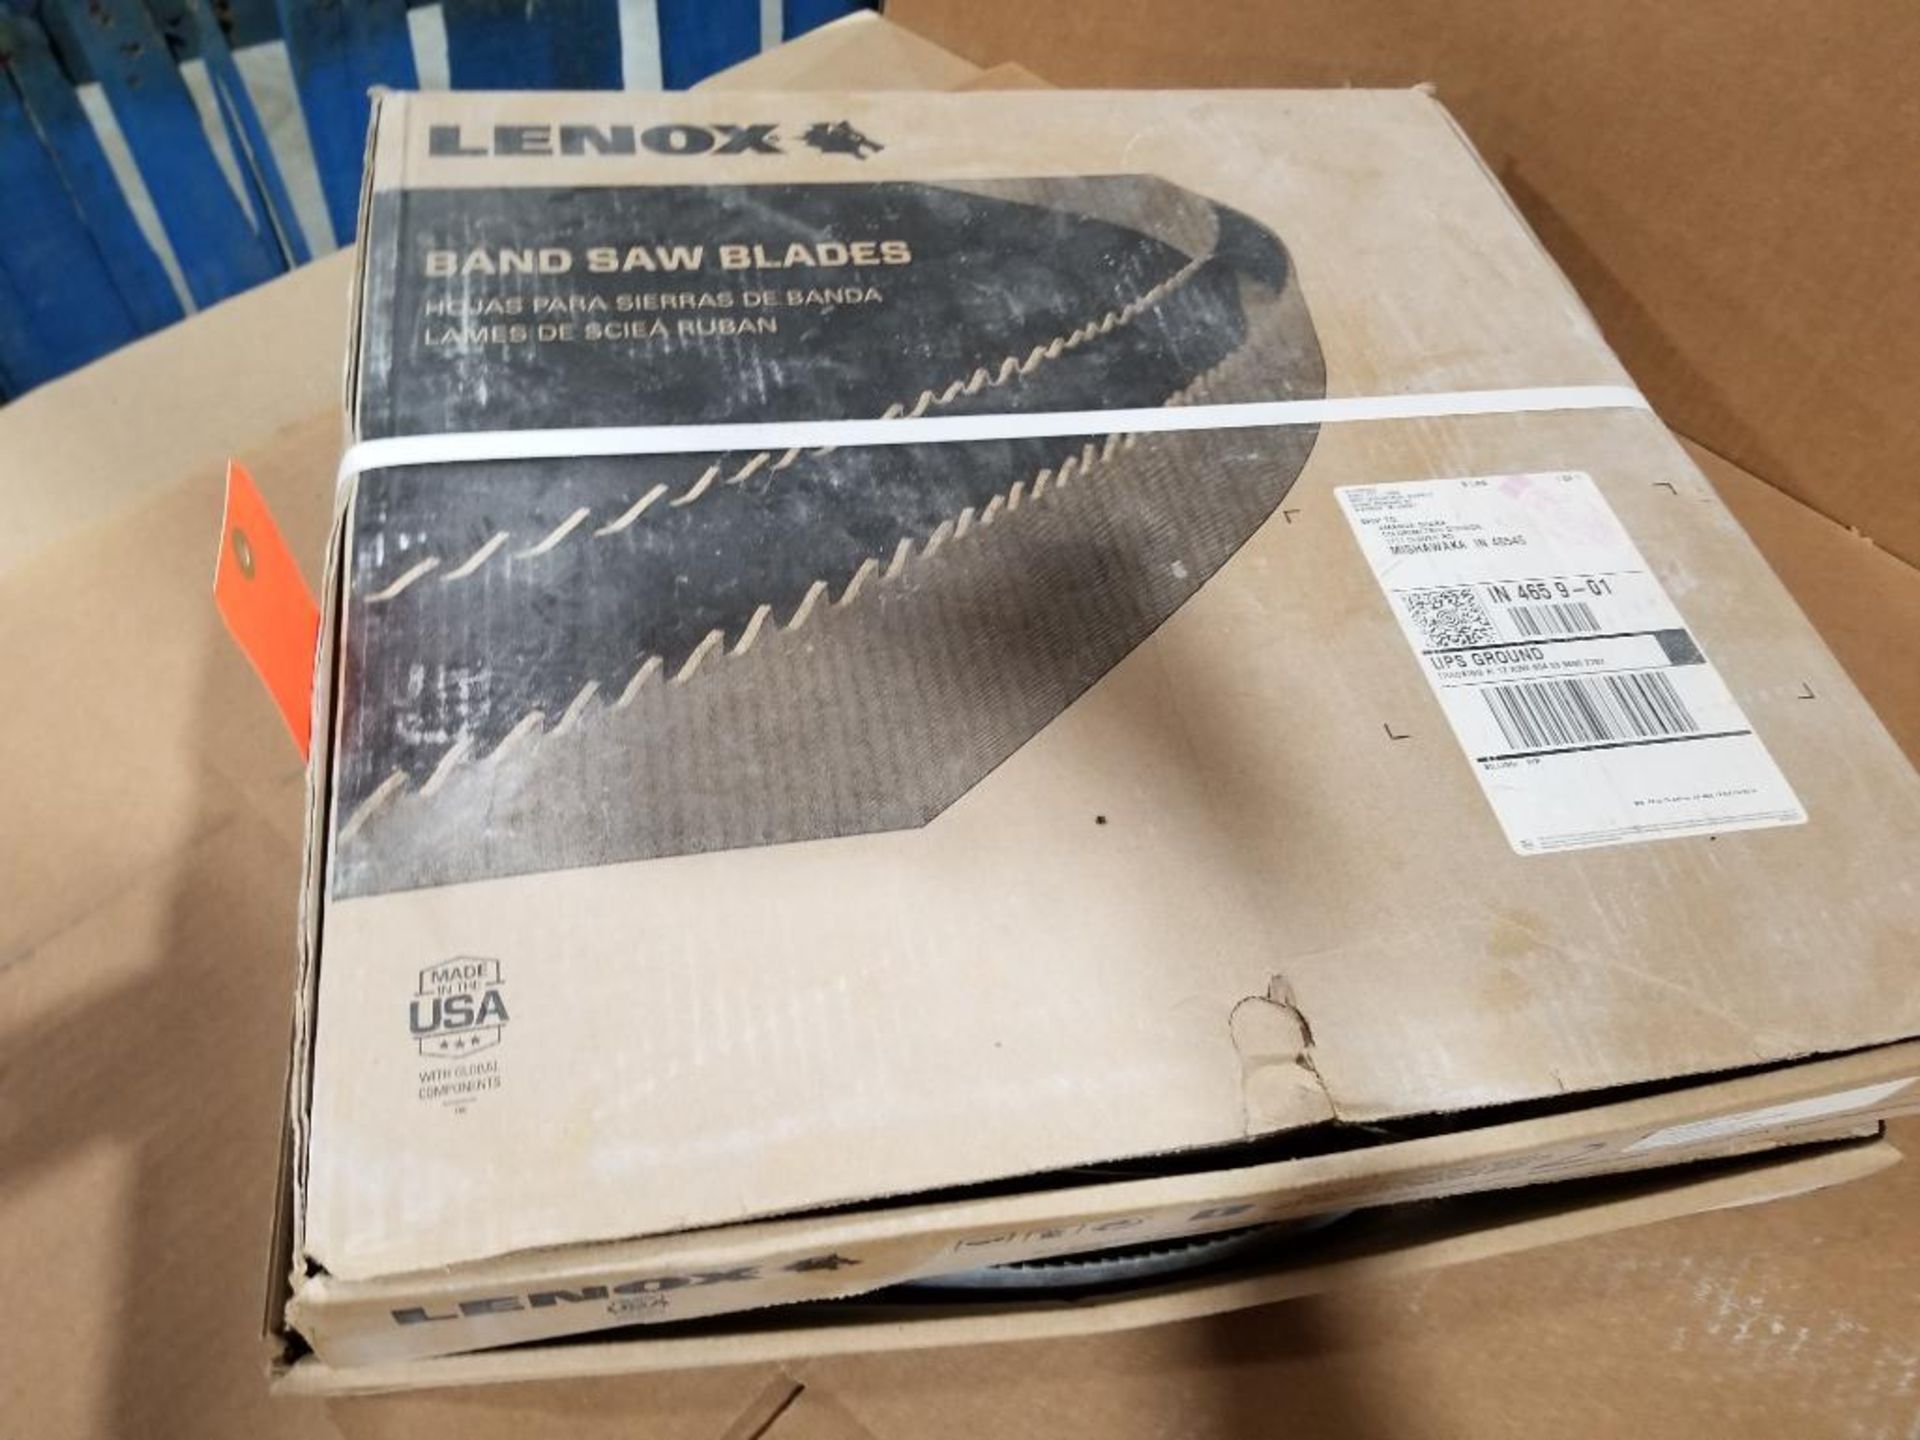 Qty 2 - Lenox band saw blades. Part number 77402147. 15ft x 1in.